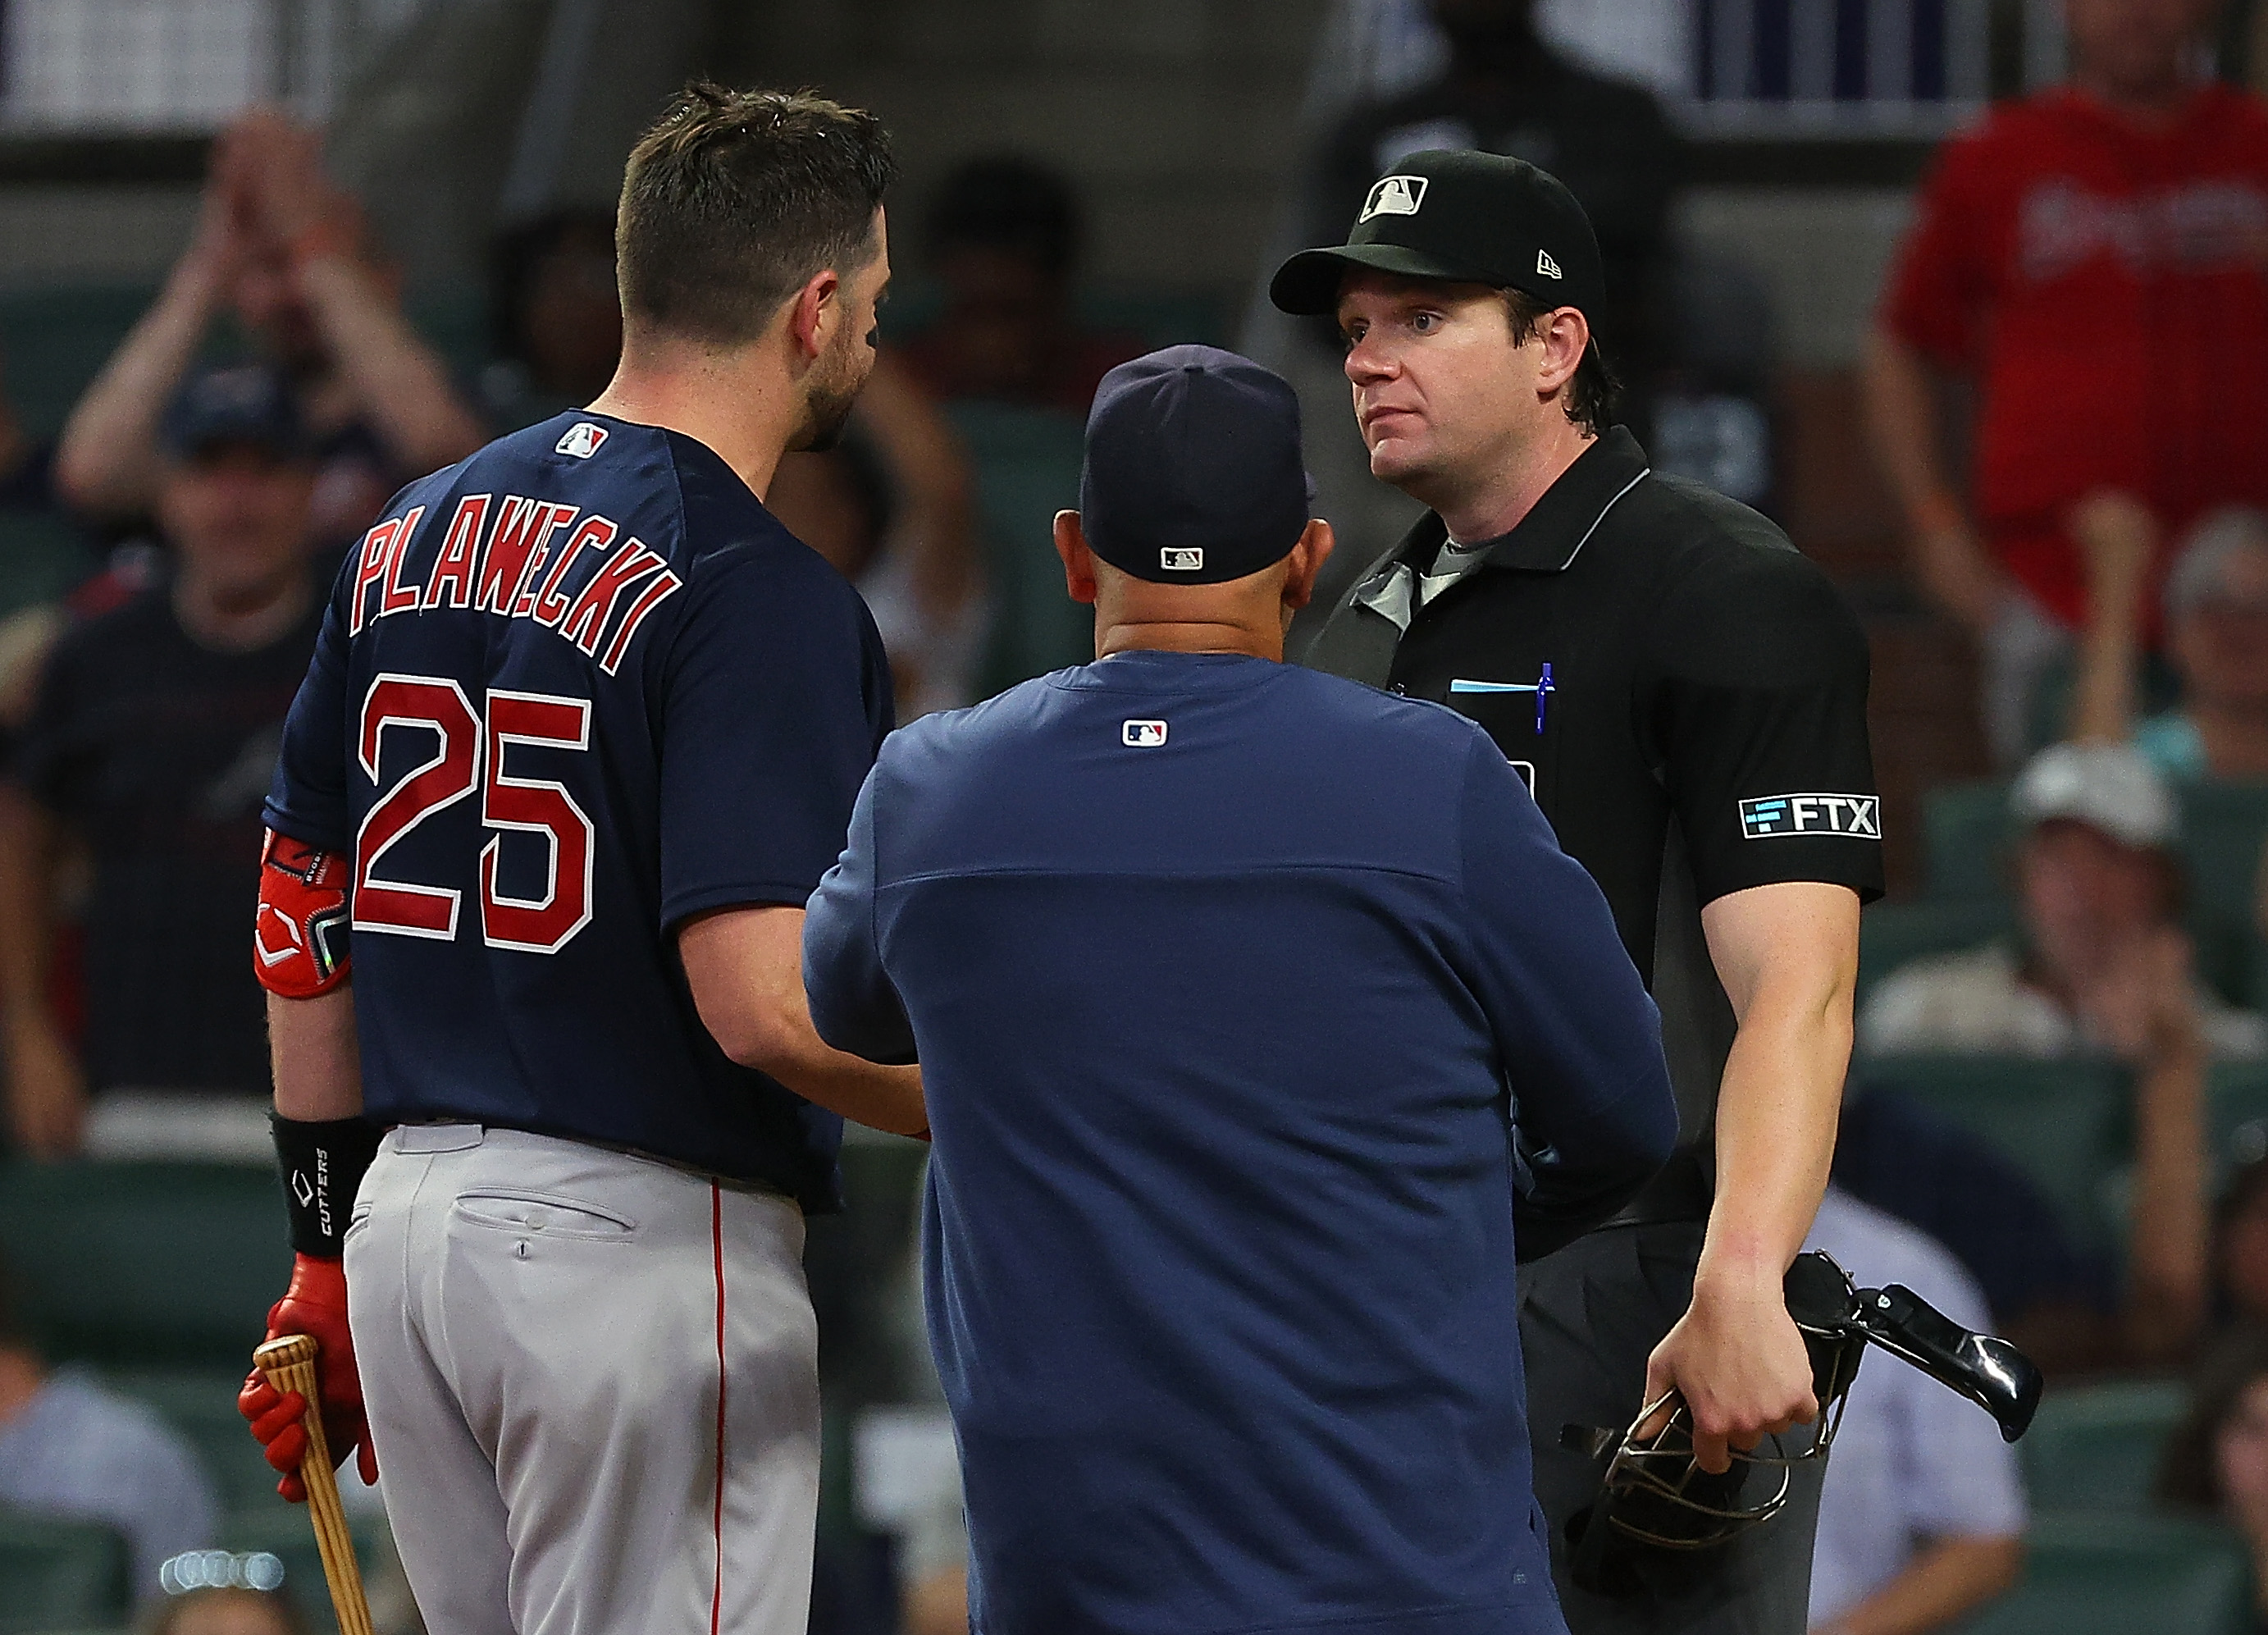 MLB: 5 changes we'd love to see from umpires in 2022